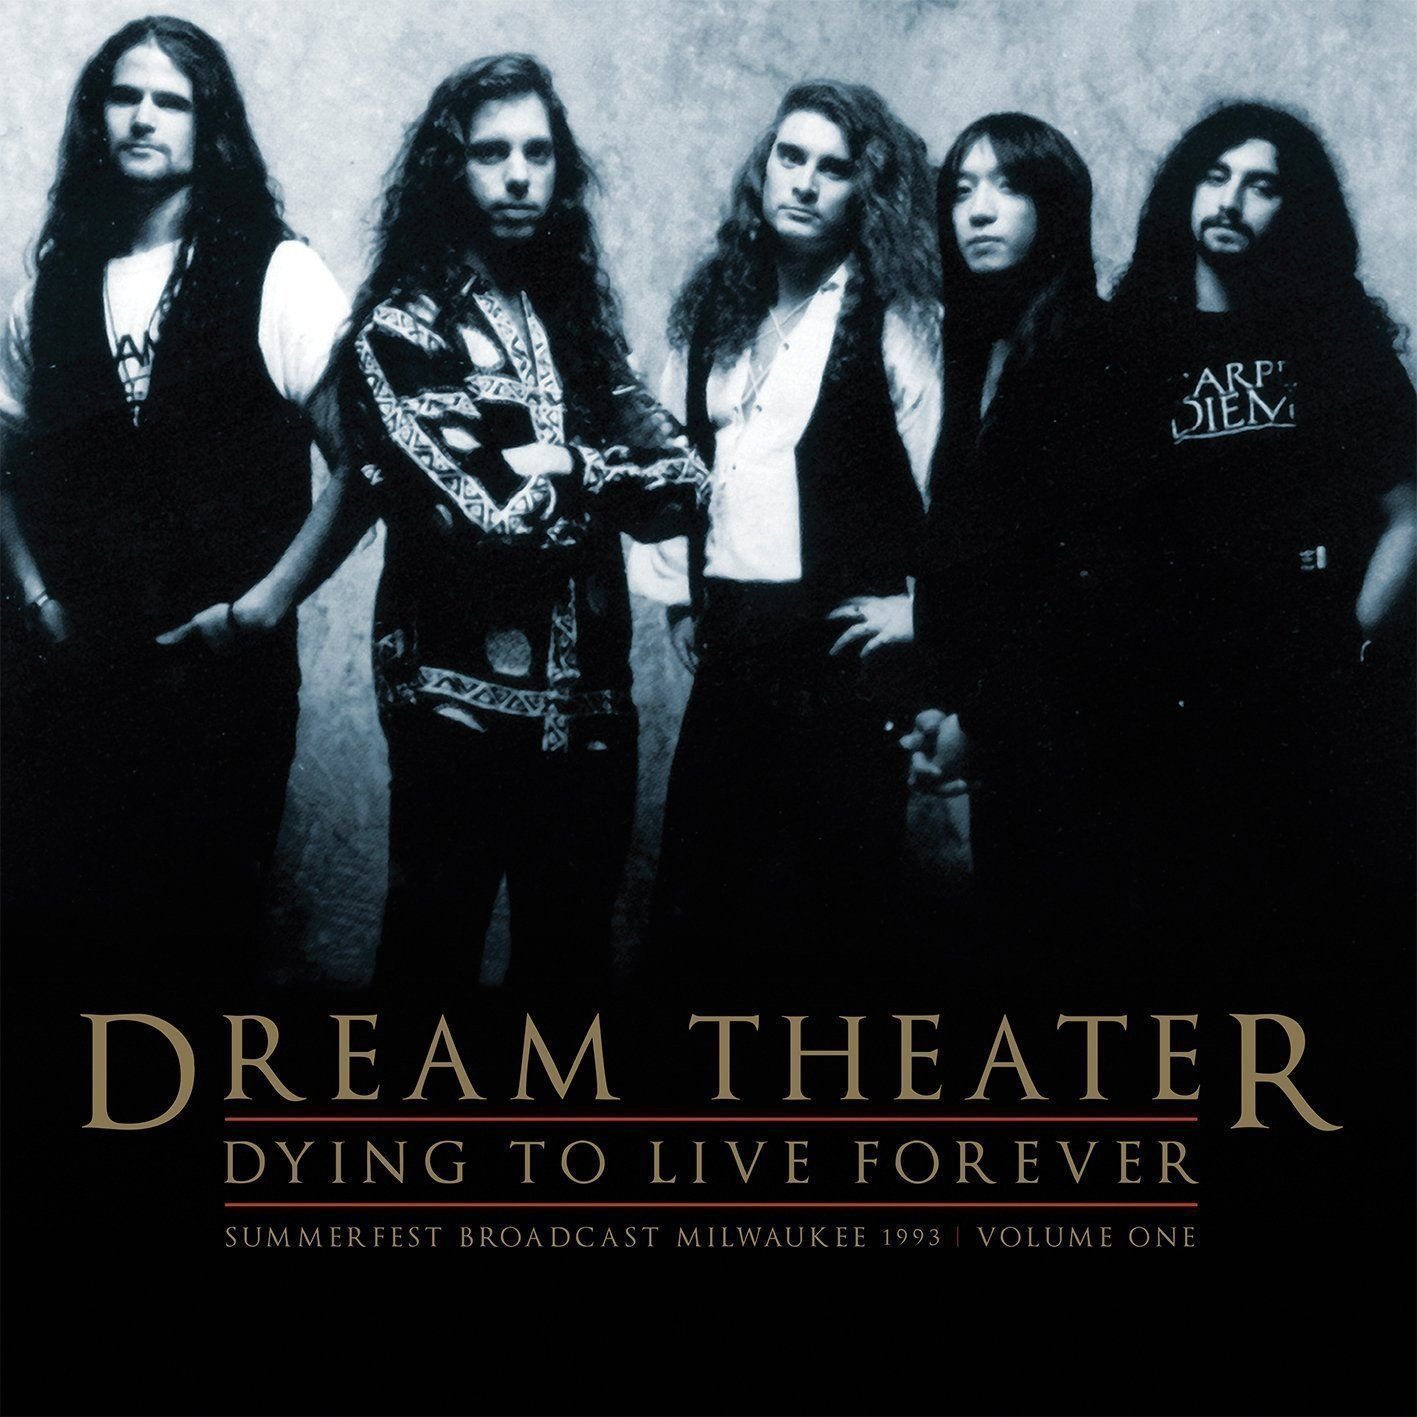 Disque vinyle Dream Theater - Dying To Live Forever - Milwaukee 1993 Vol. 1 (2 LP)